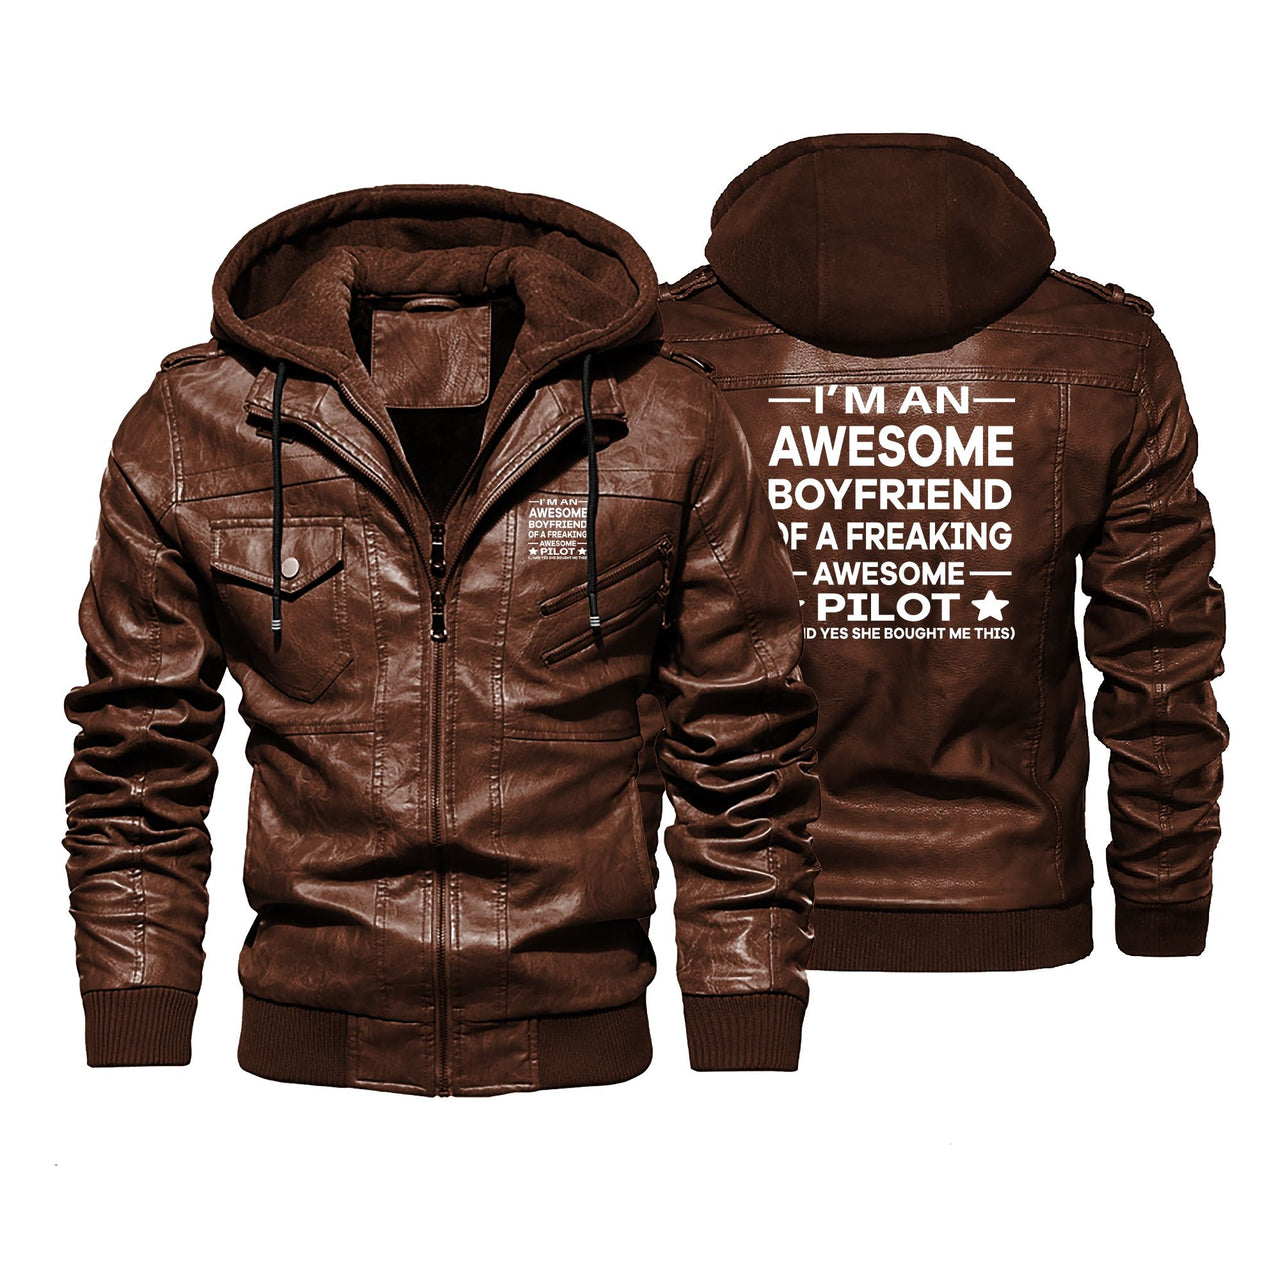 I am an Awesome Boyfriend Designed Hooded Leather Jackets